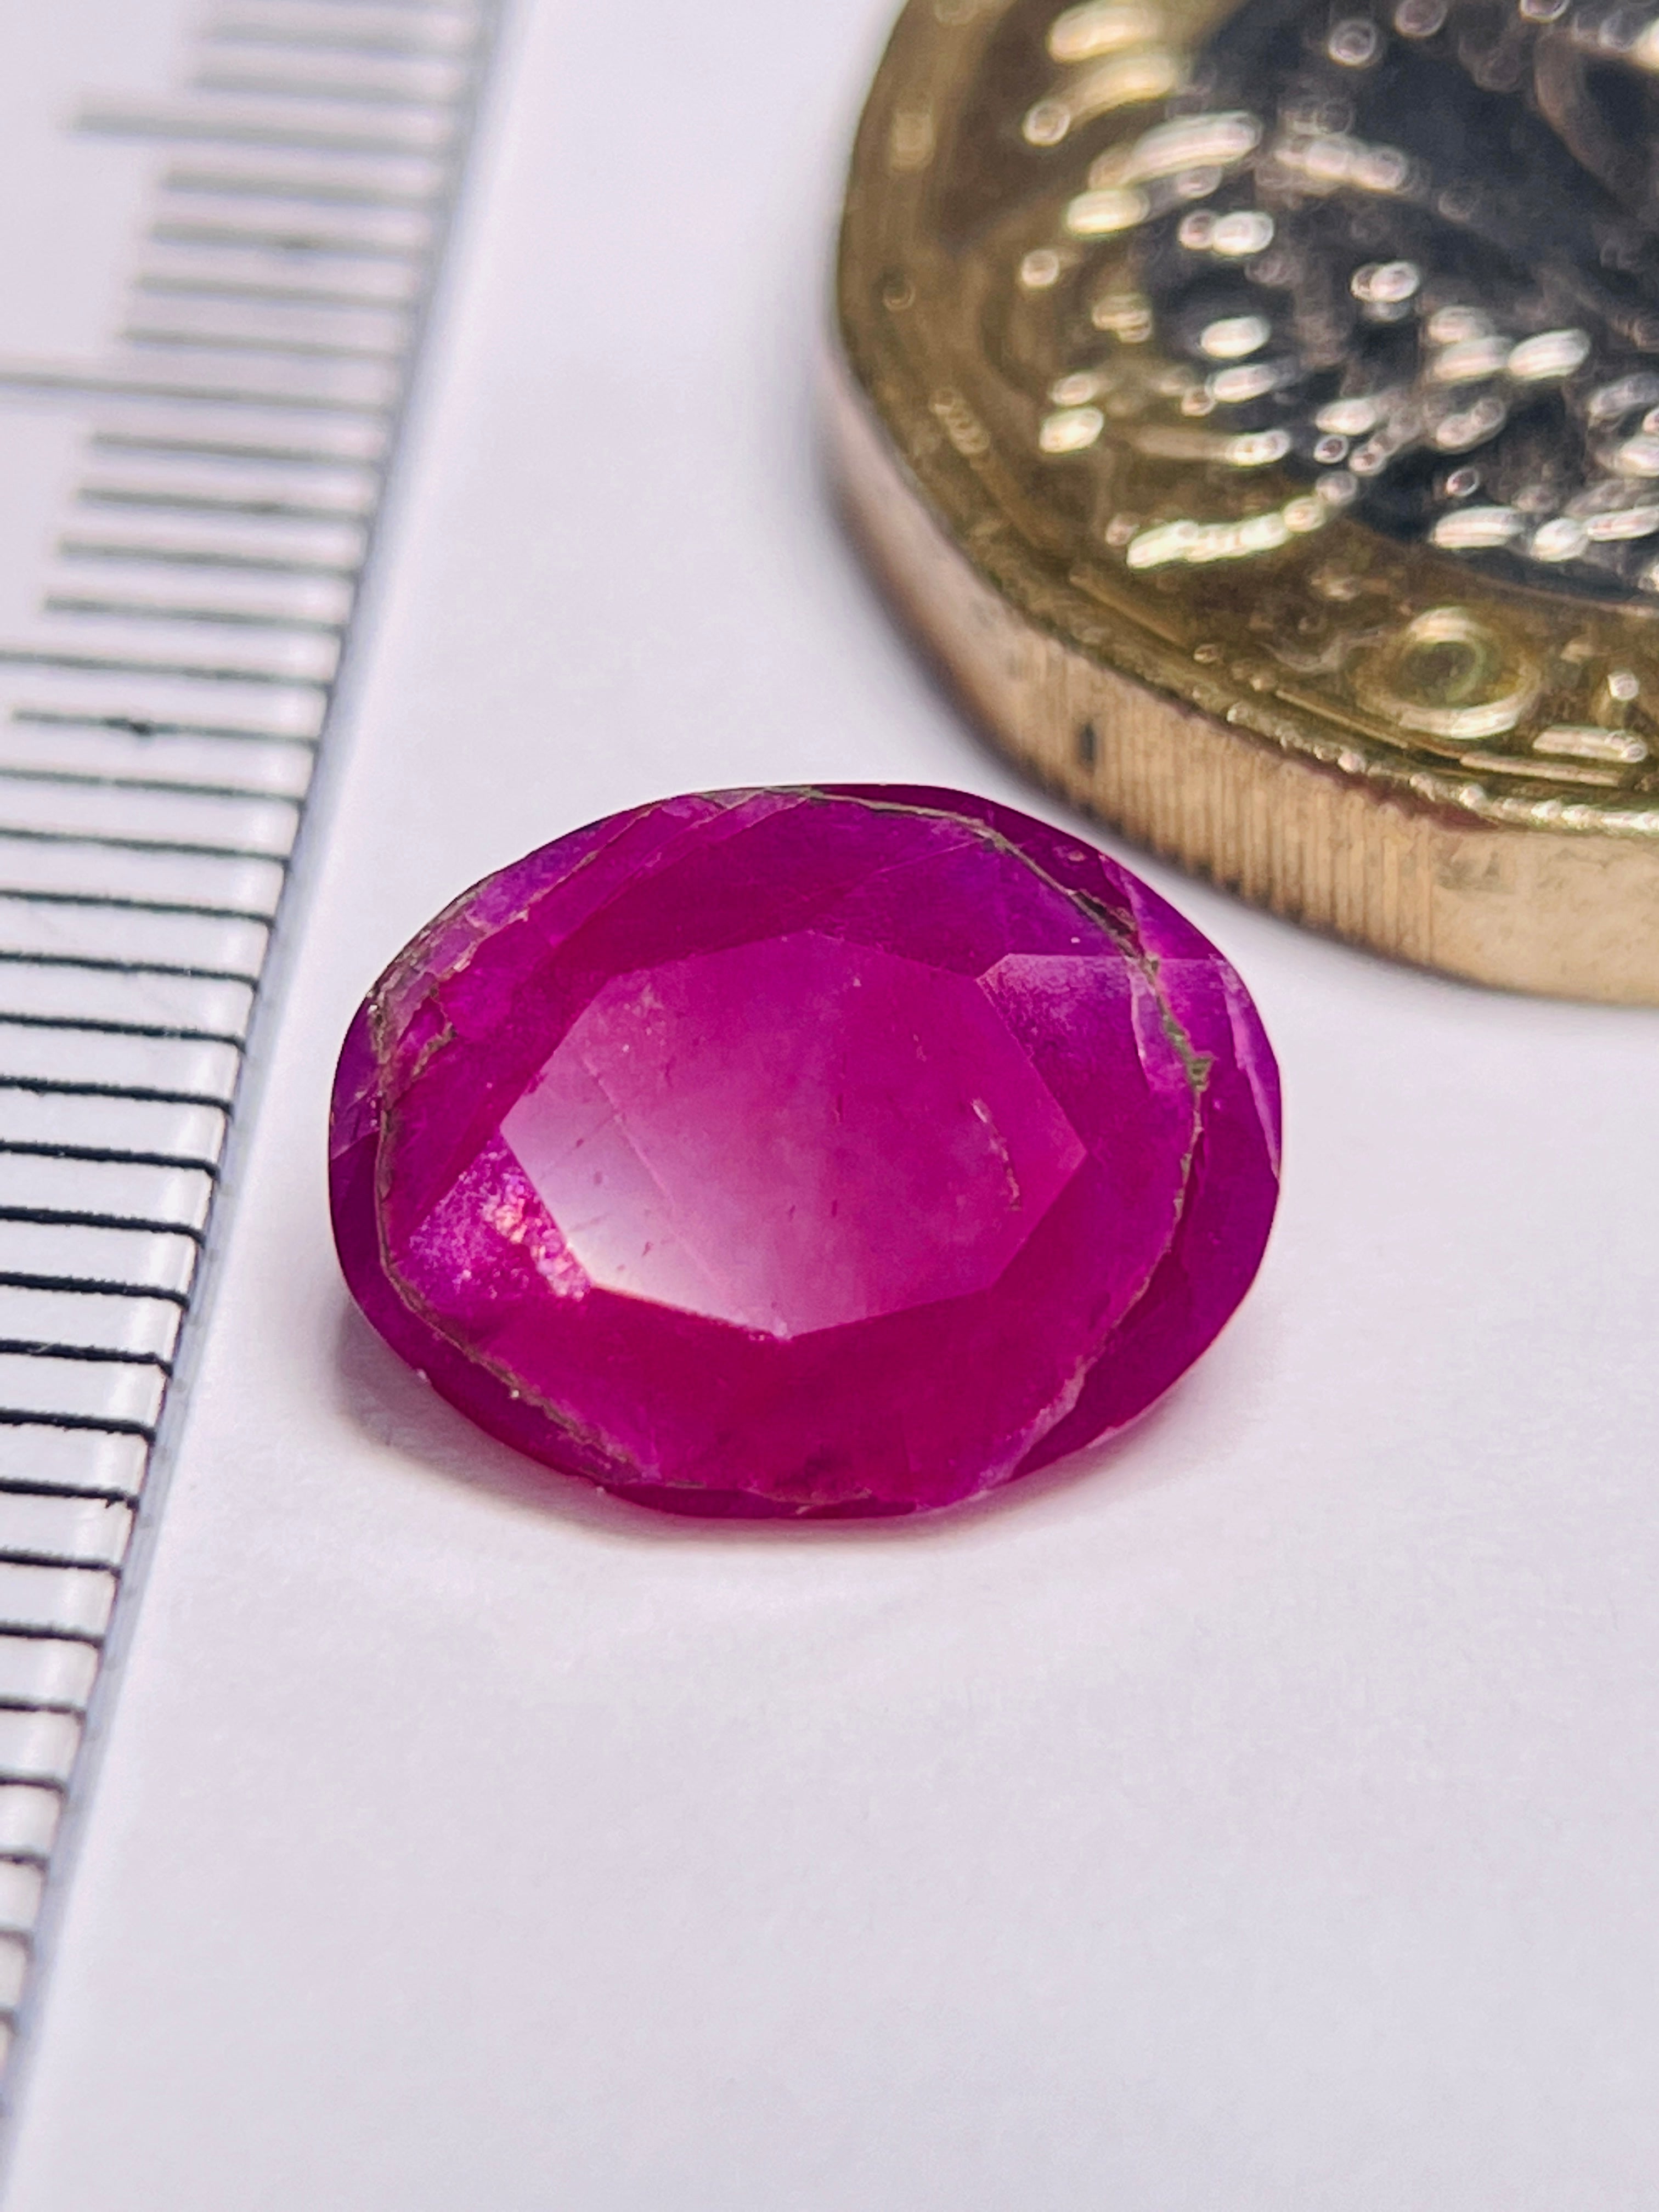 3.12Ct Sapphire Morogoro Tanzania. Untreated Unheated Can Be Used Either Way Crown Up Or Pavilion